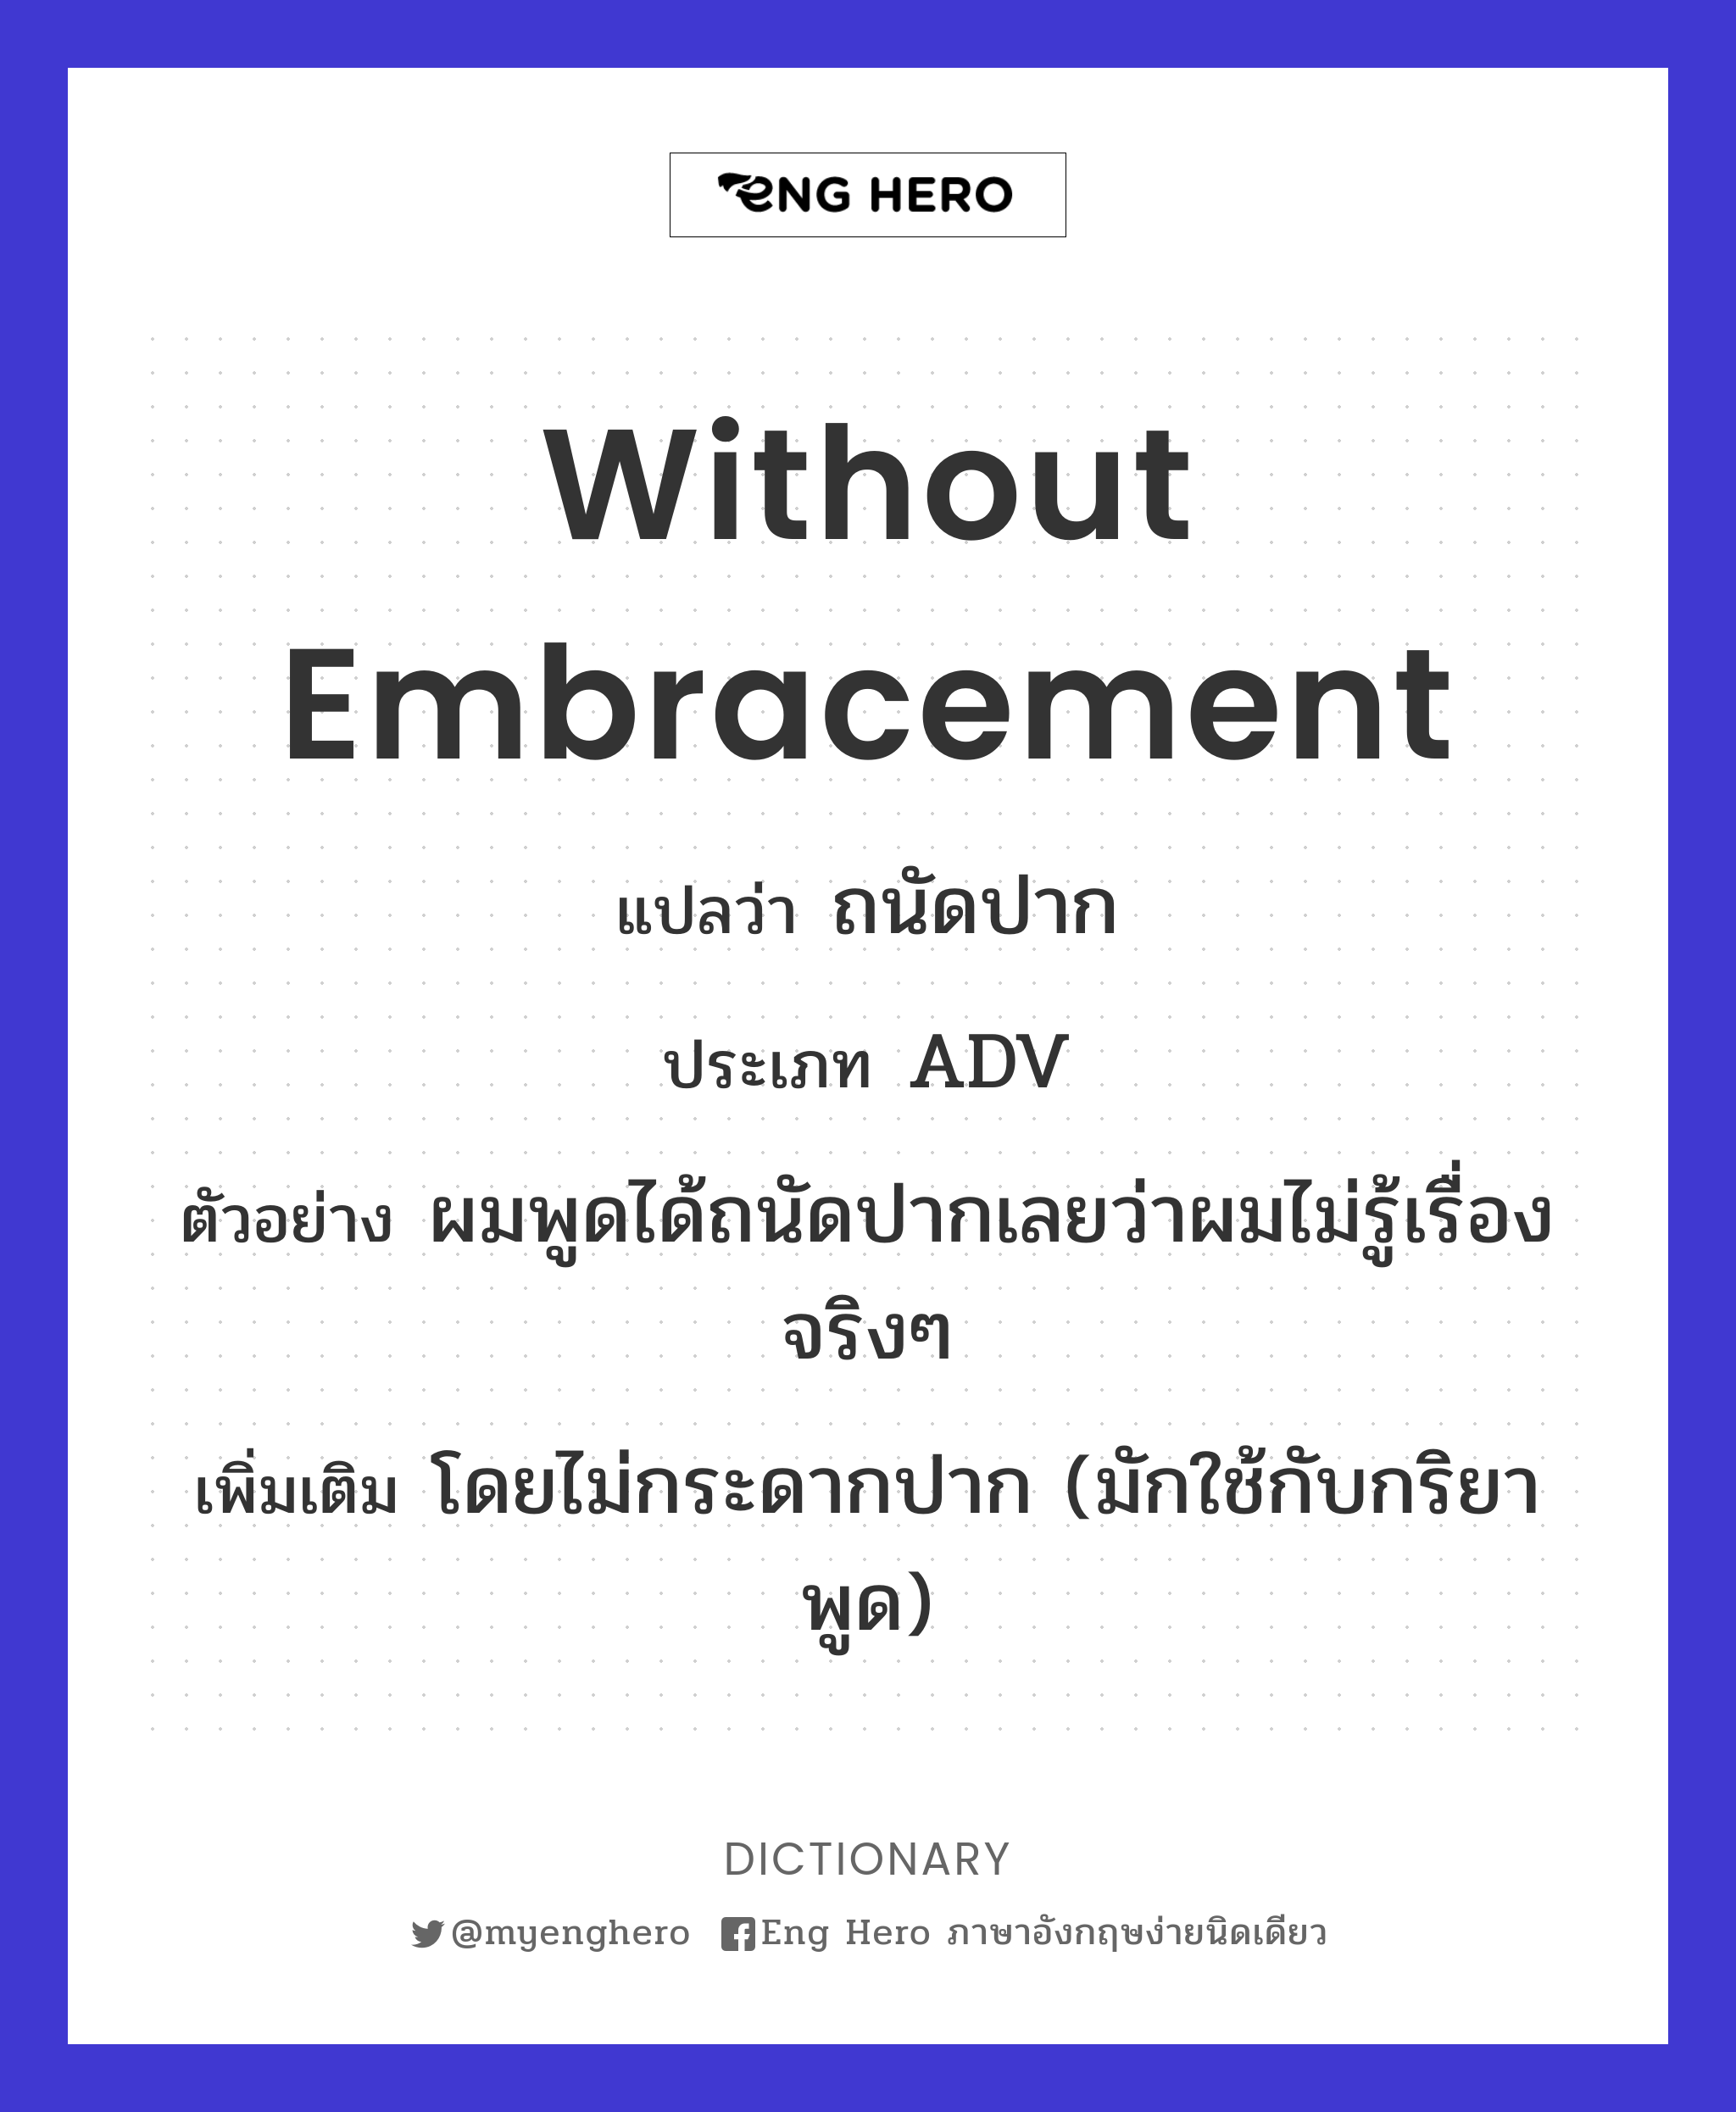 without embracement